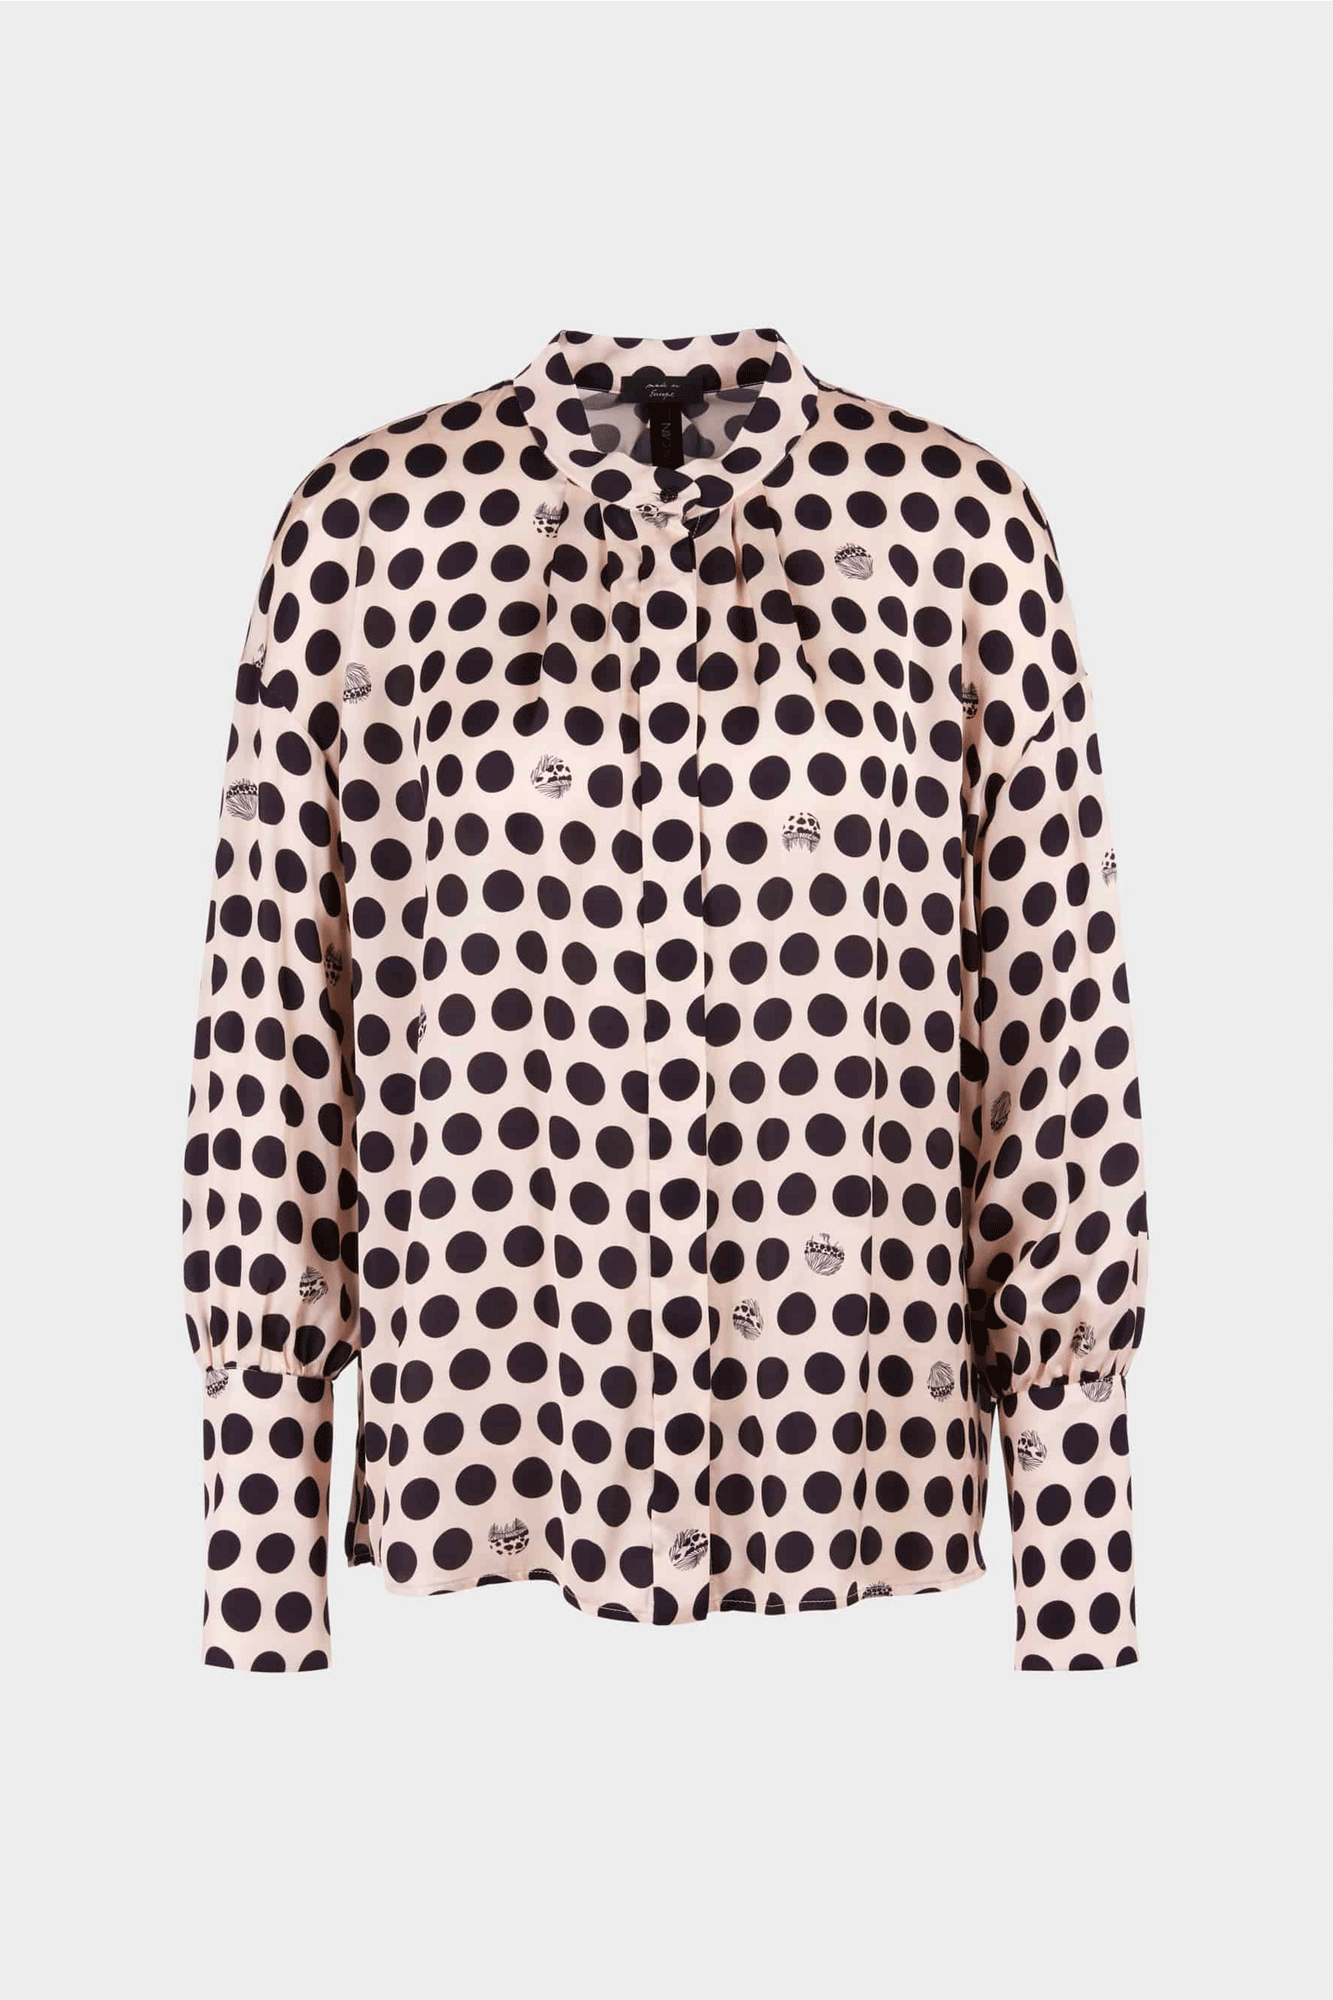 This Dot Printed Blouse is made from breathable, lightweight viscose for a comfortable and casual look. A vintage-inspired stand-up collar and pleats in the front add fashionable detail, while dropped shoulders provide a contemporary silhouette. Perfect for any occasion.